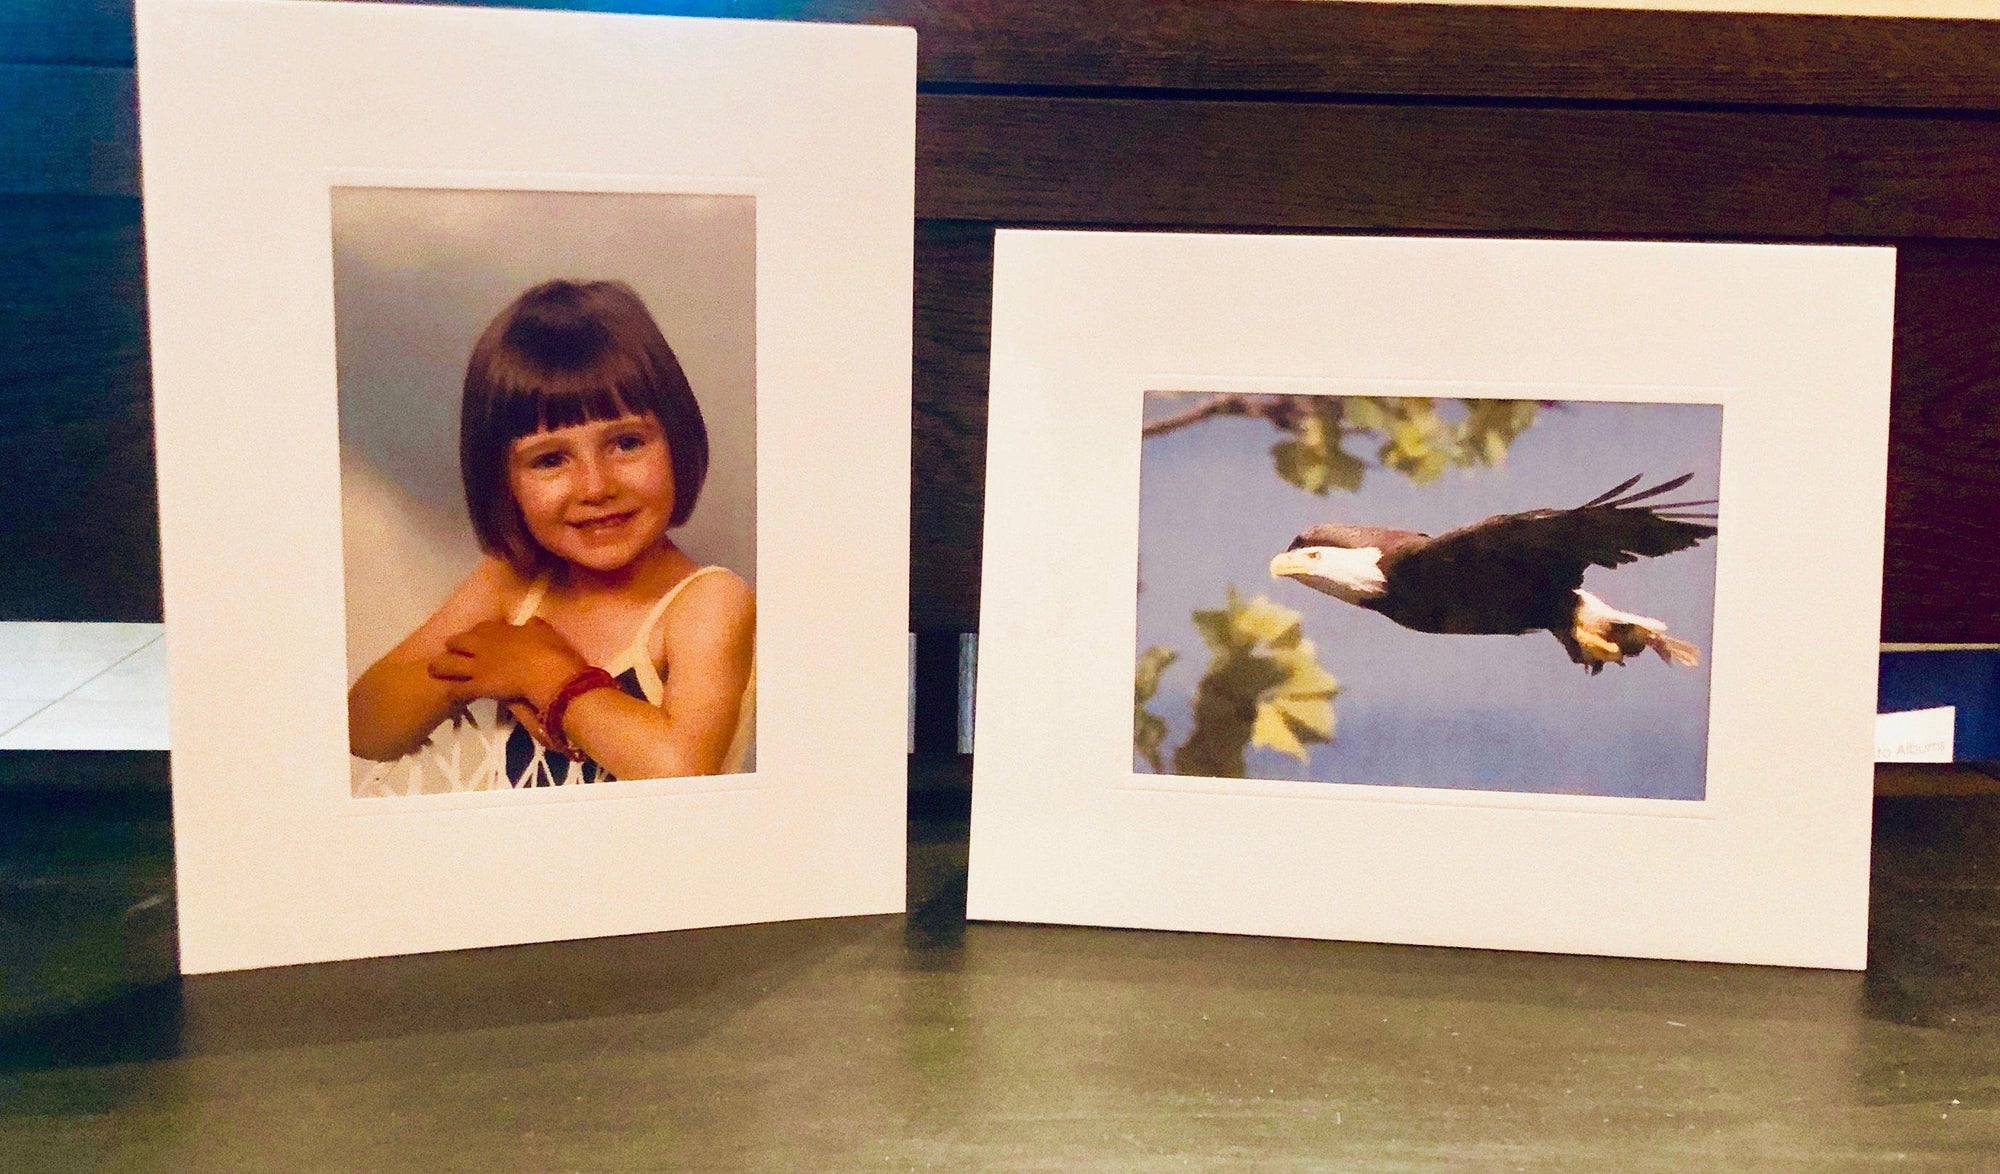 5" x 7" Photo Insert Note Cards